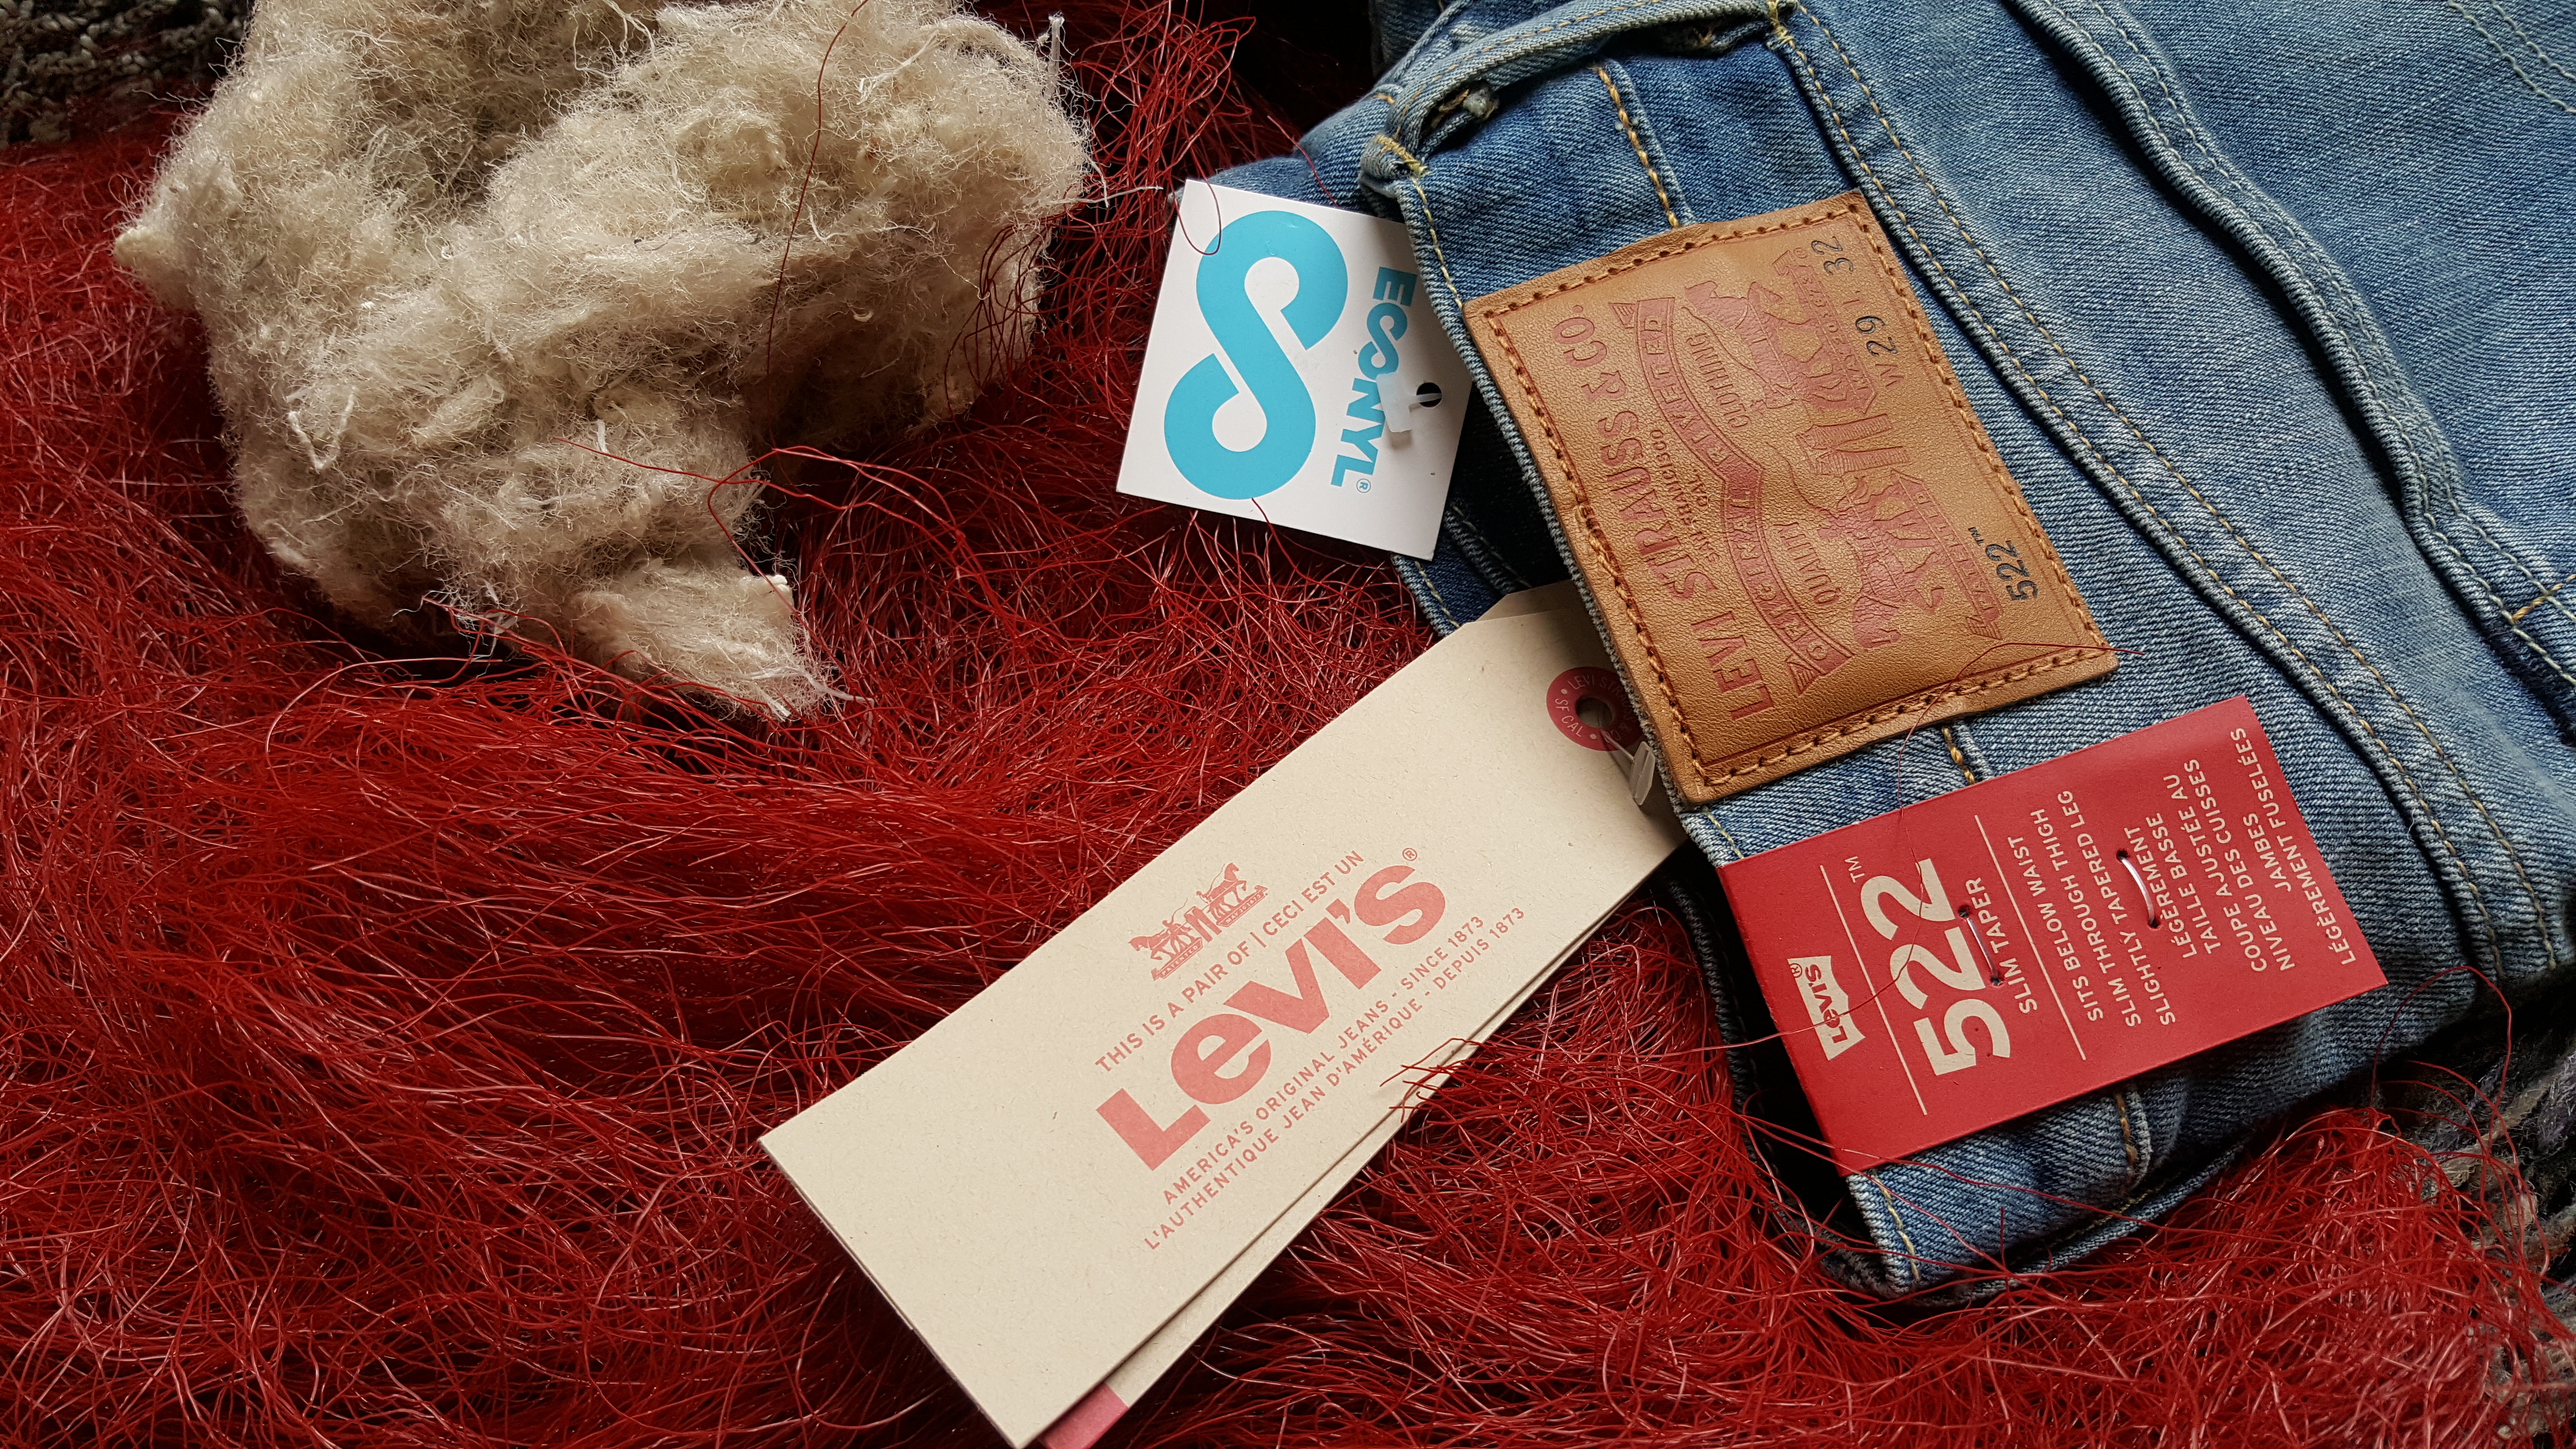 ECONYL® yarn for the first time into Levi's jeans - Econyl